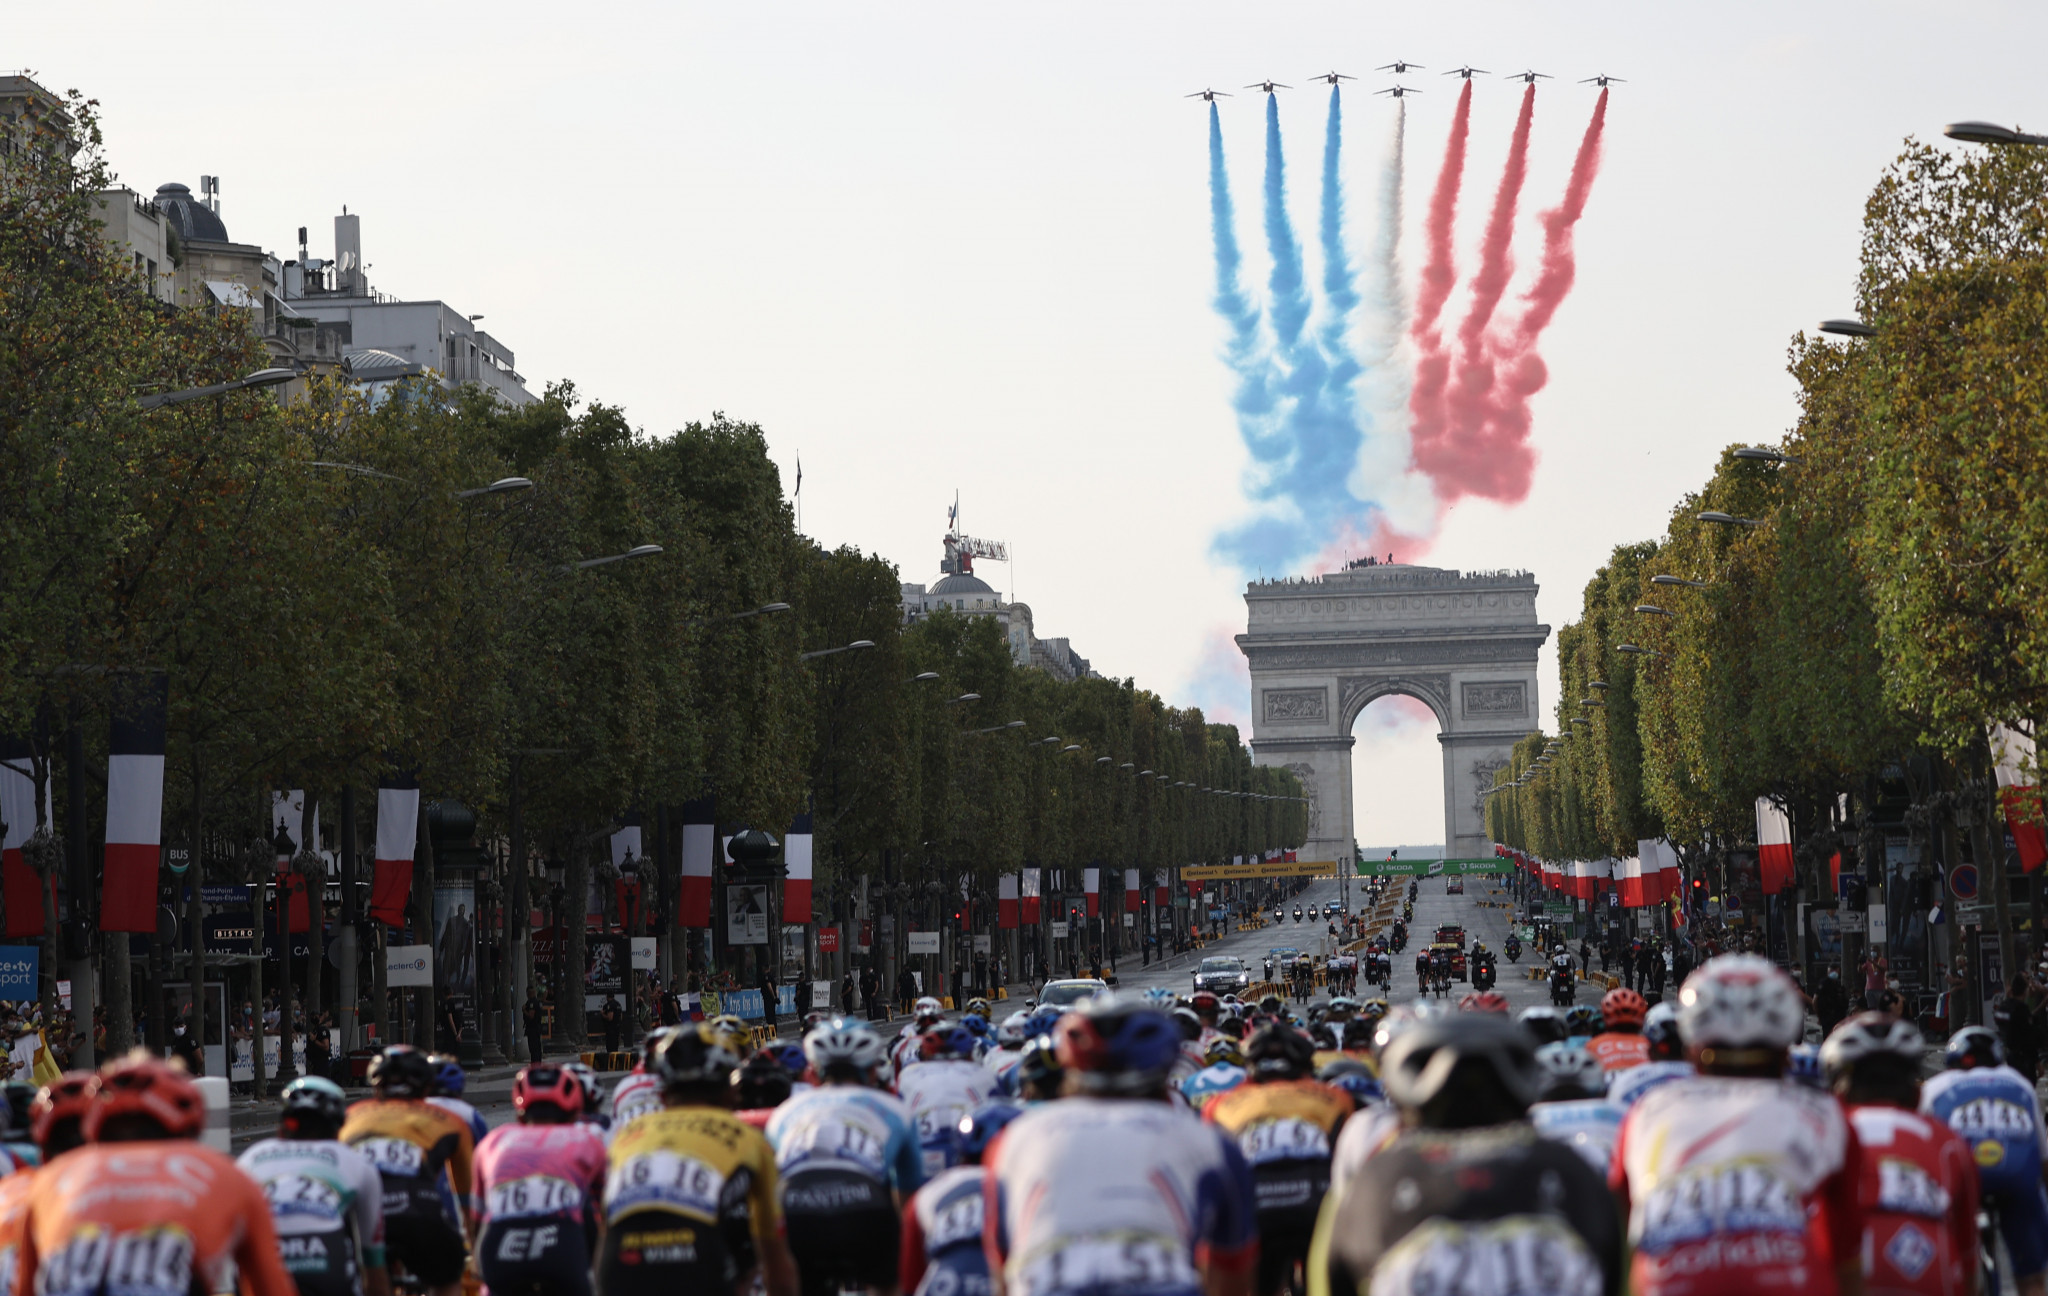 The Champs-Élysées is unavailable to host the final stage of the Tour de France in 2024 due to Paris' staging of the Olympic Games ©Getty Images